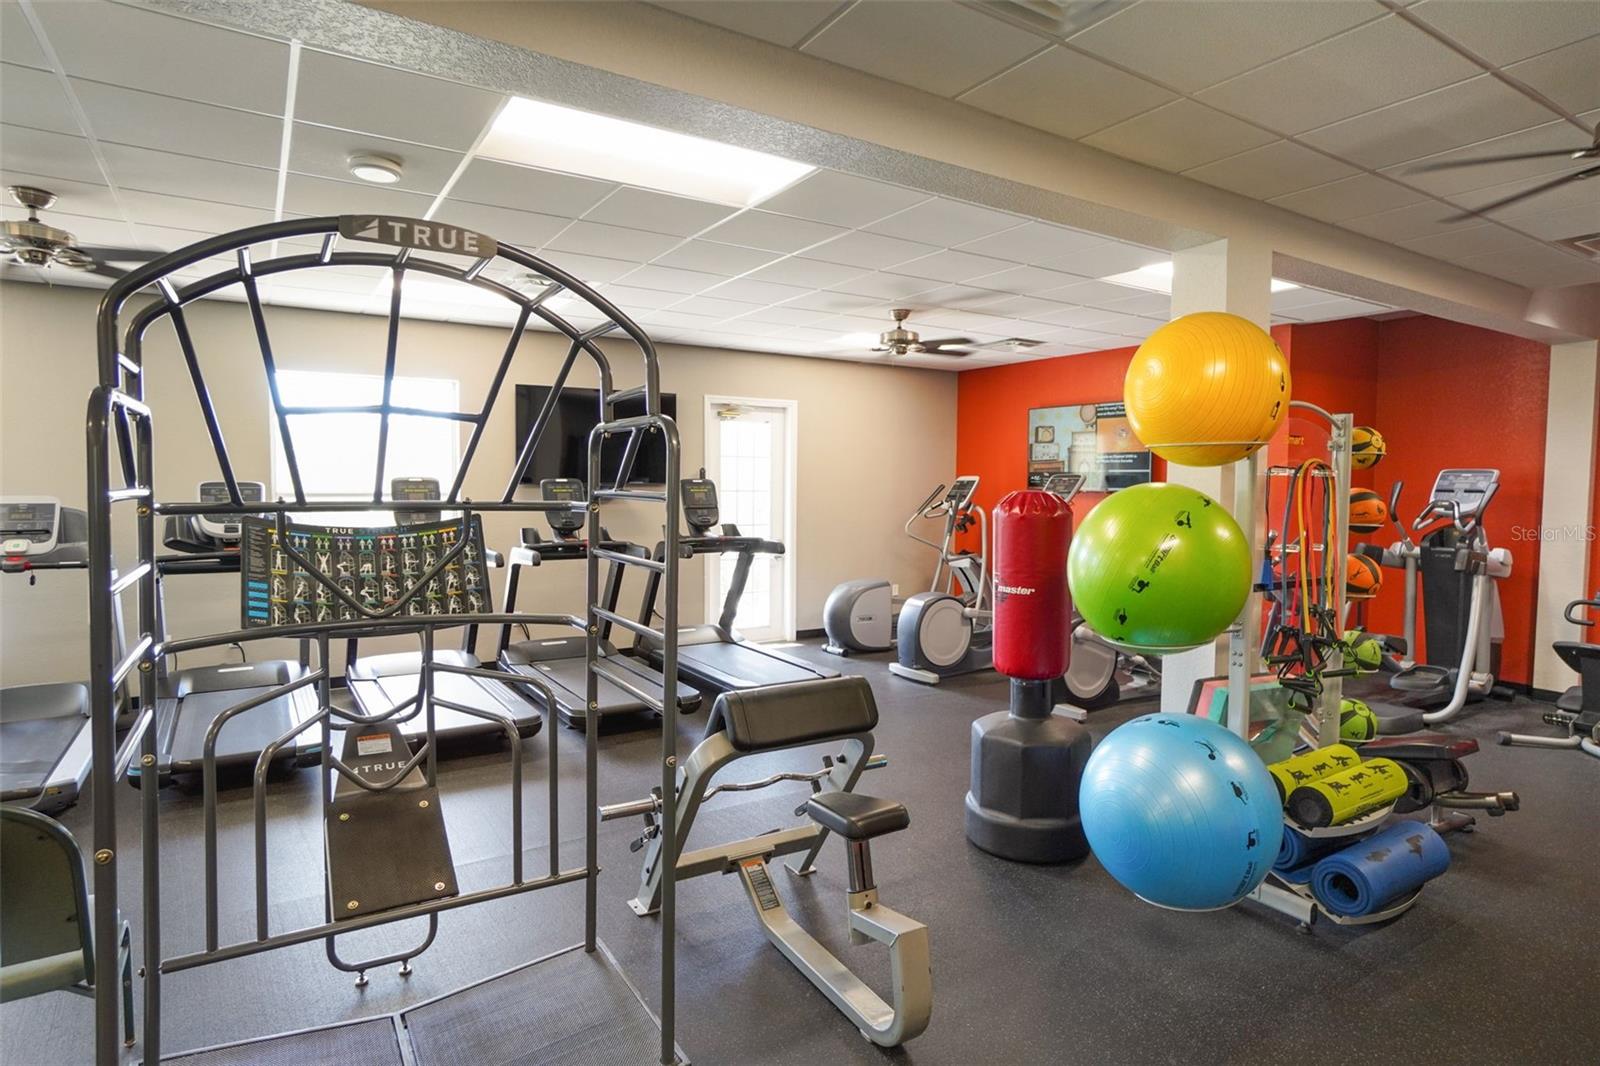 Go for a workout in the fitness center.